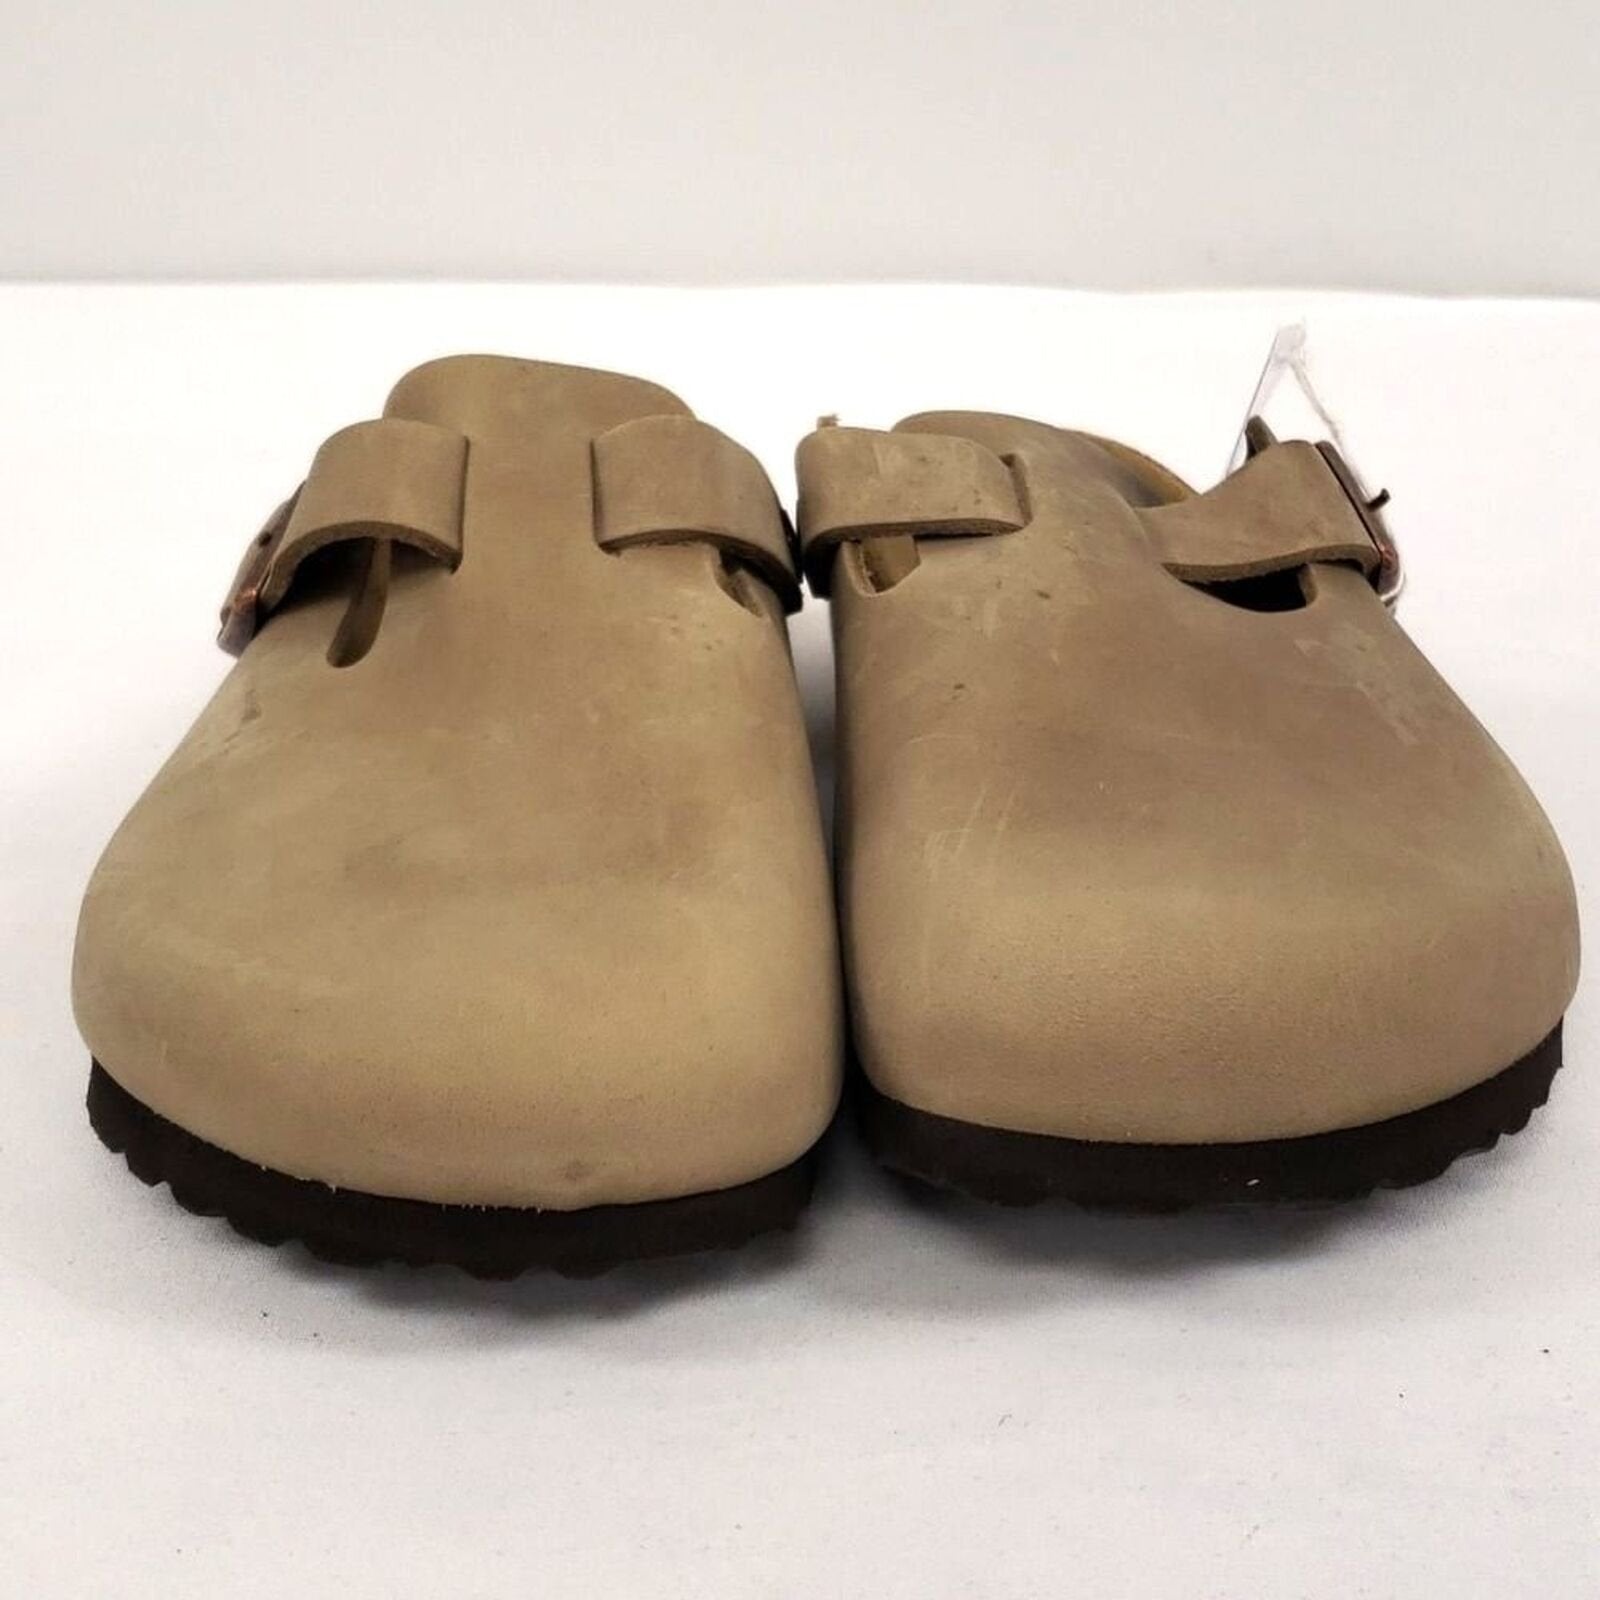 Birkenstock Unisexs Clogs and Mules brown leather 8 us